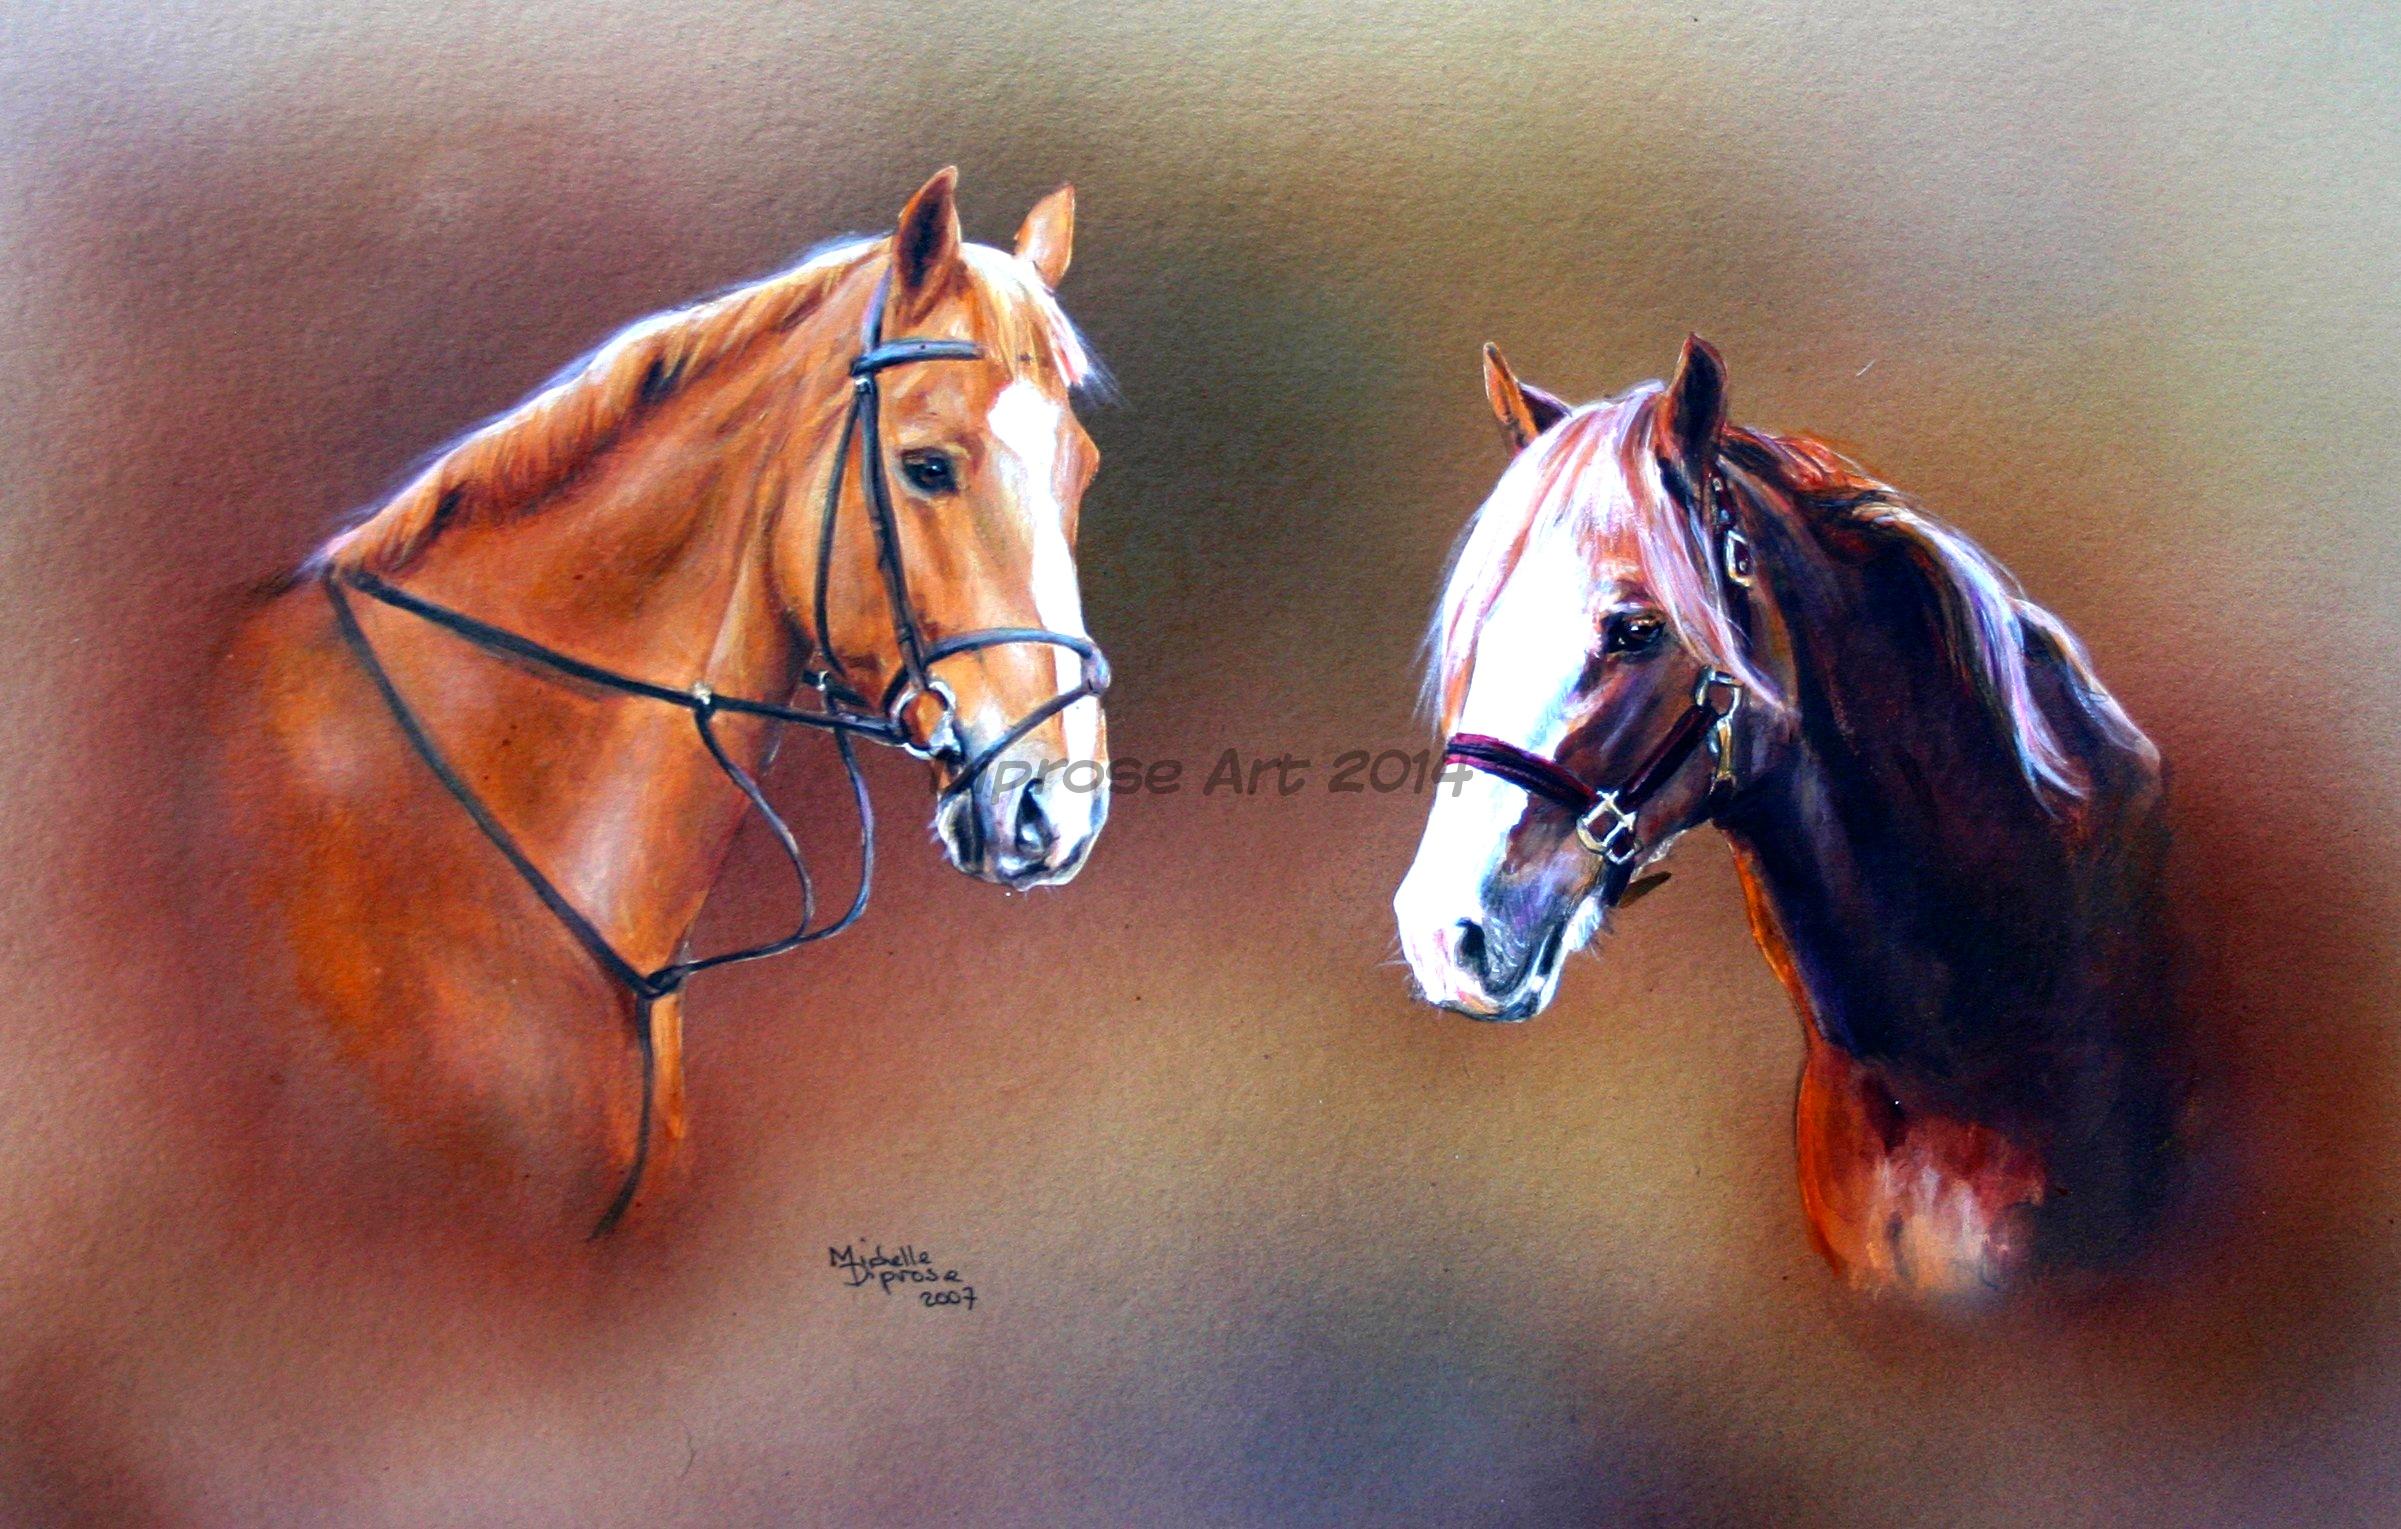 Acrylics on board - approx A3 - horse portraits - You would think that two chestnut horses with white blazes would look alike - but they don&#039;t.  Every horse has it&#039;s own expression and personality.